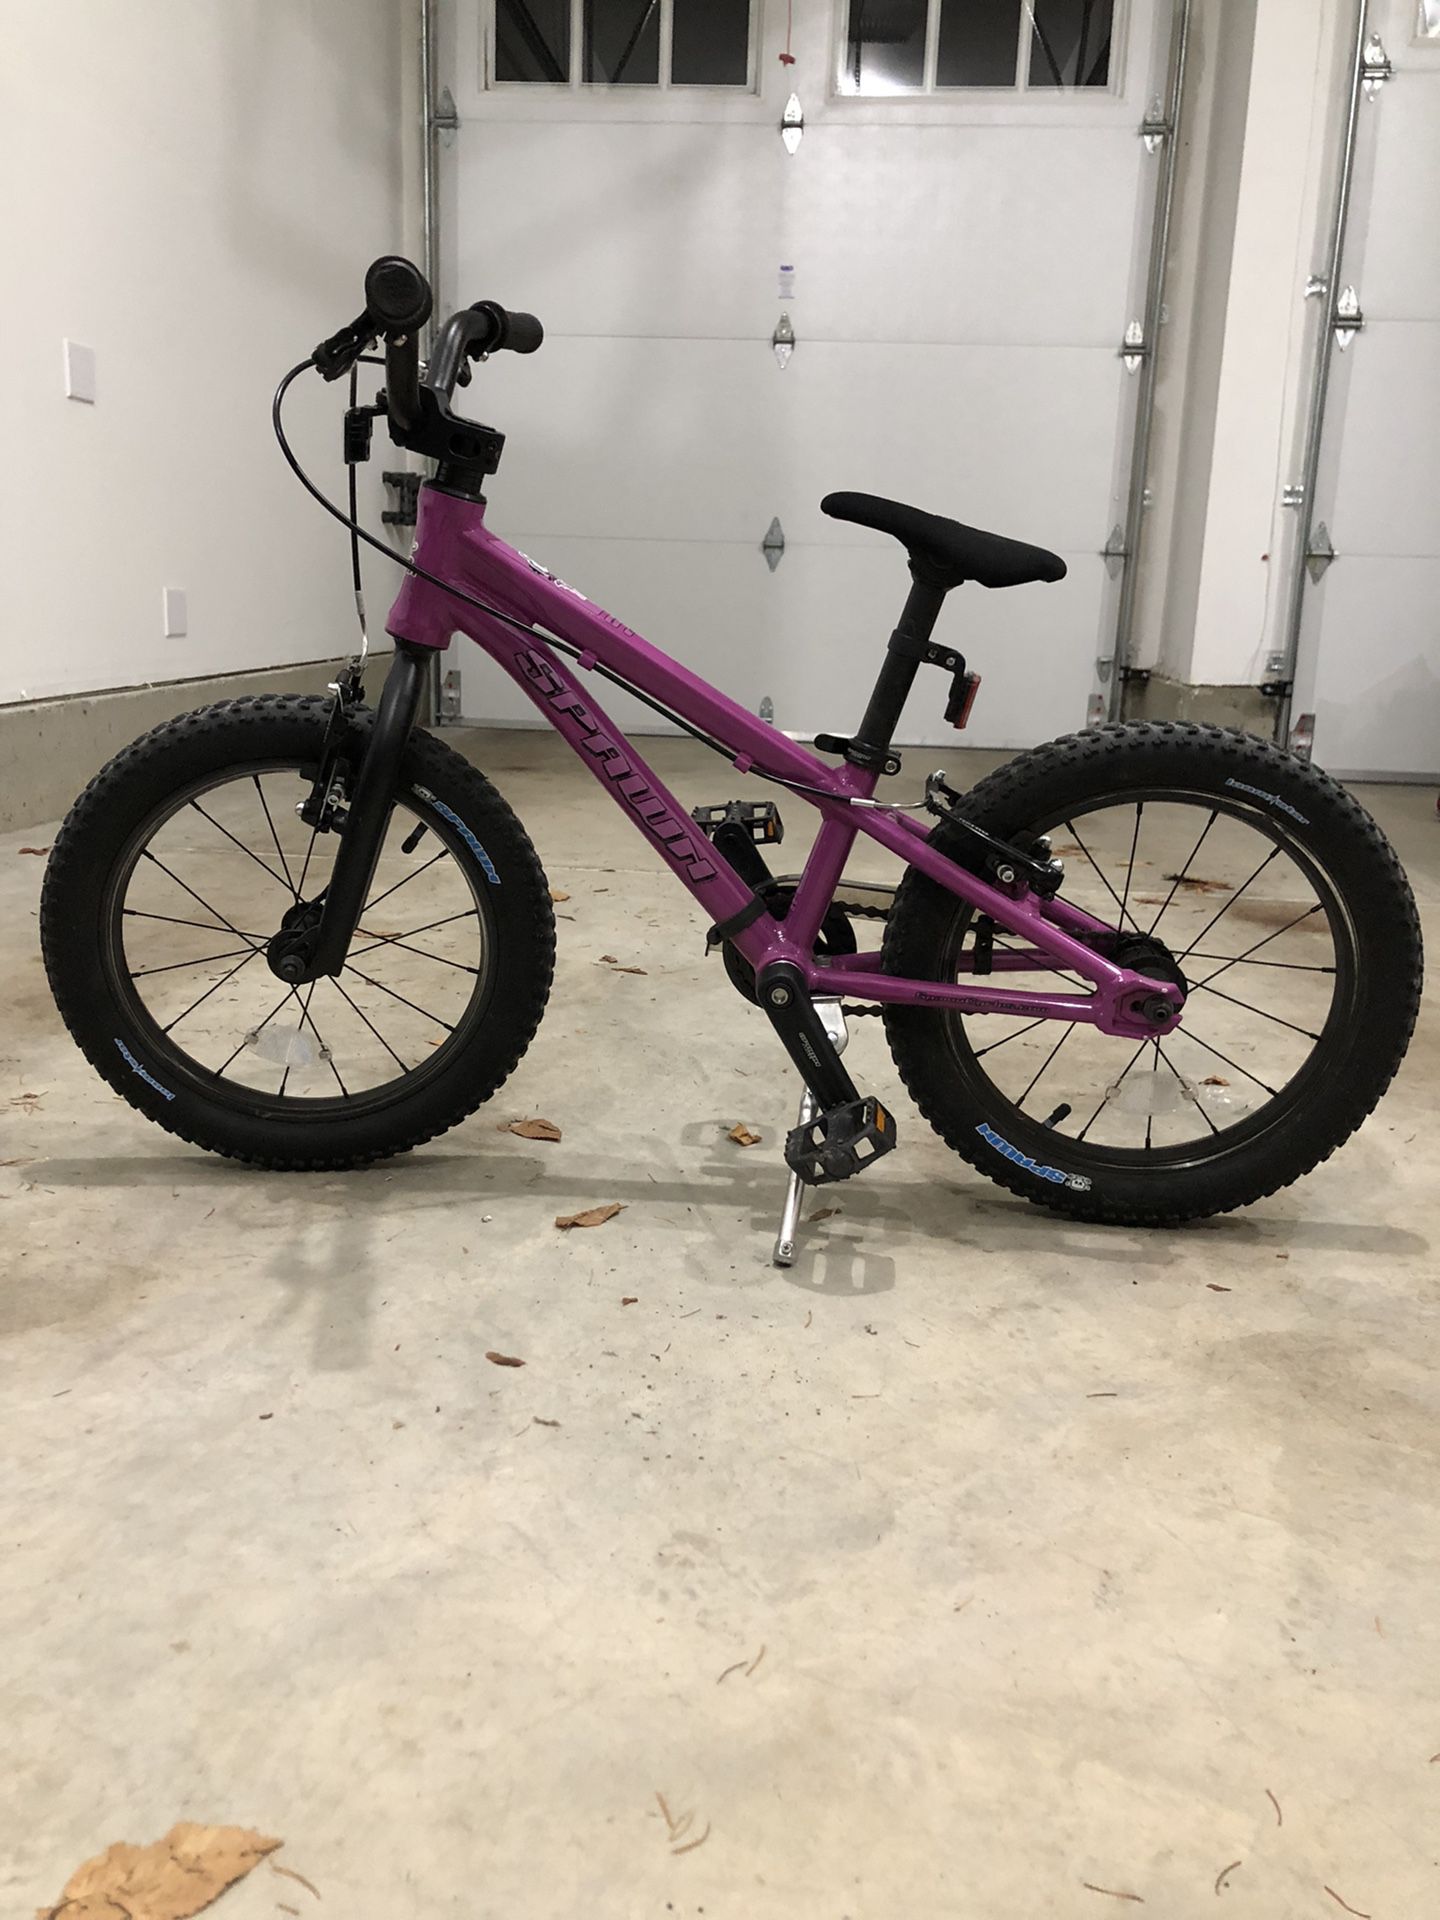 High-end bike Yoji 16” From Spawns Cycles For 3-5 Year Old